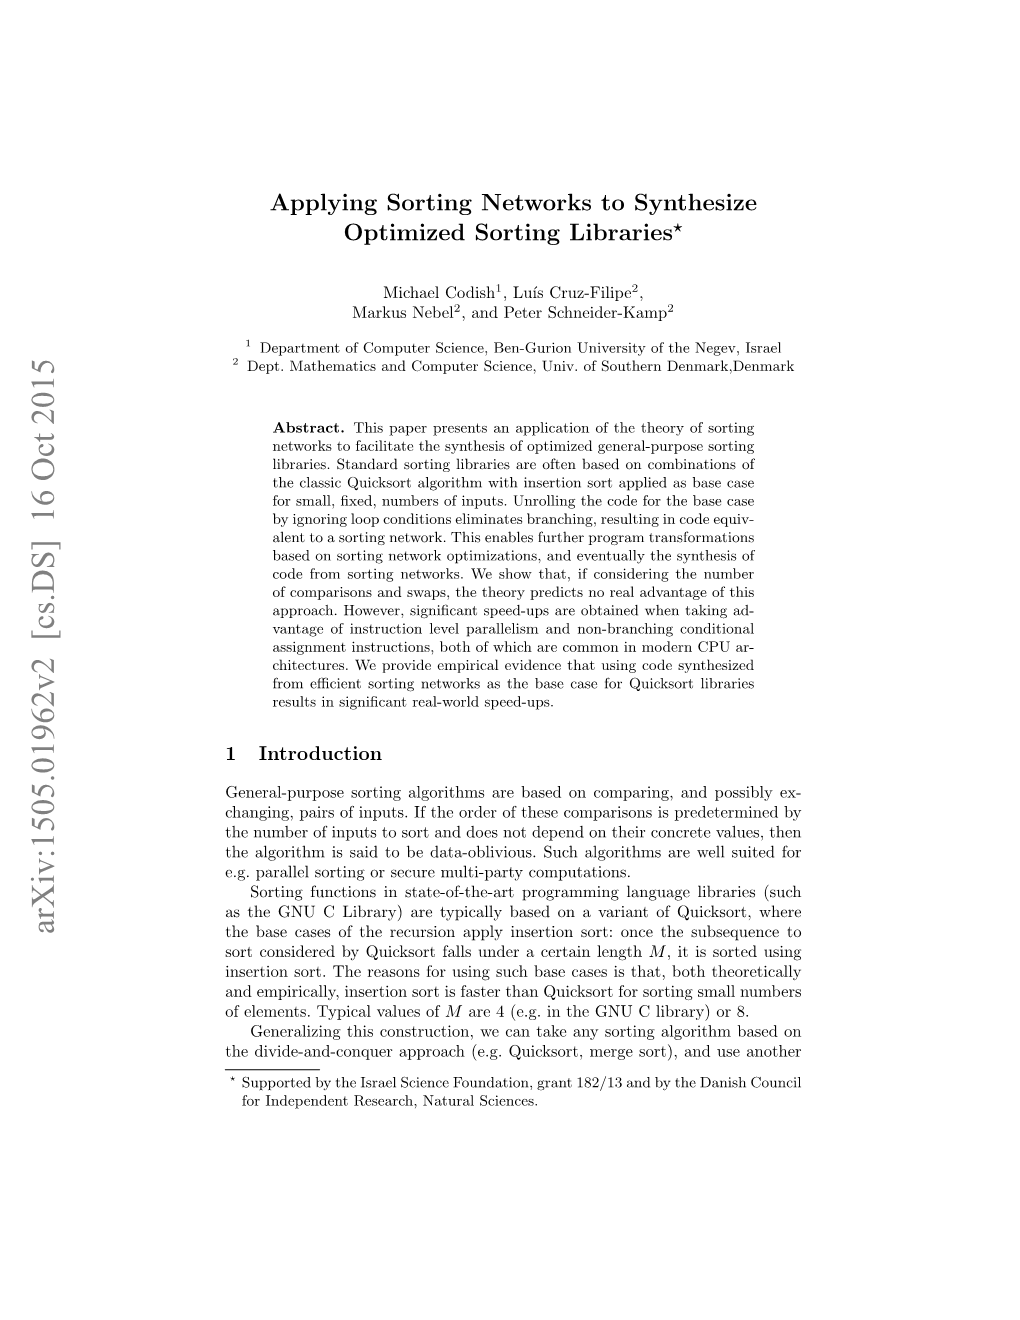 Applying Sorting Networks to Synthesize Optimized Sorting Libraries?